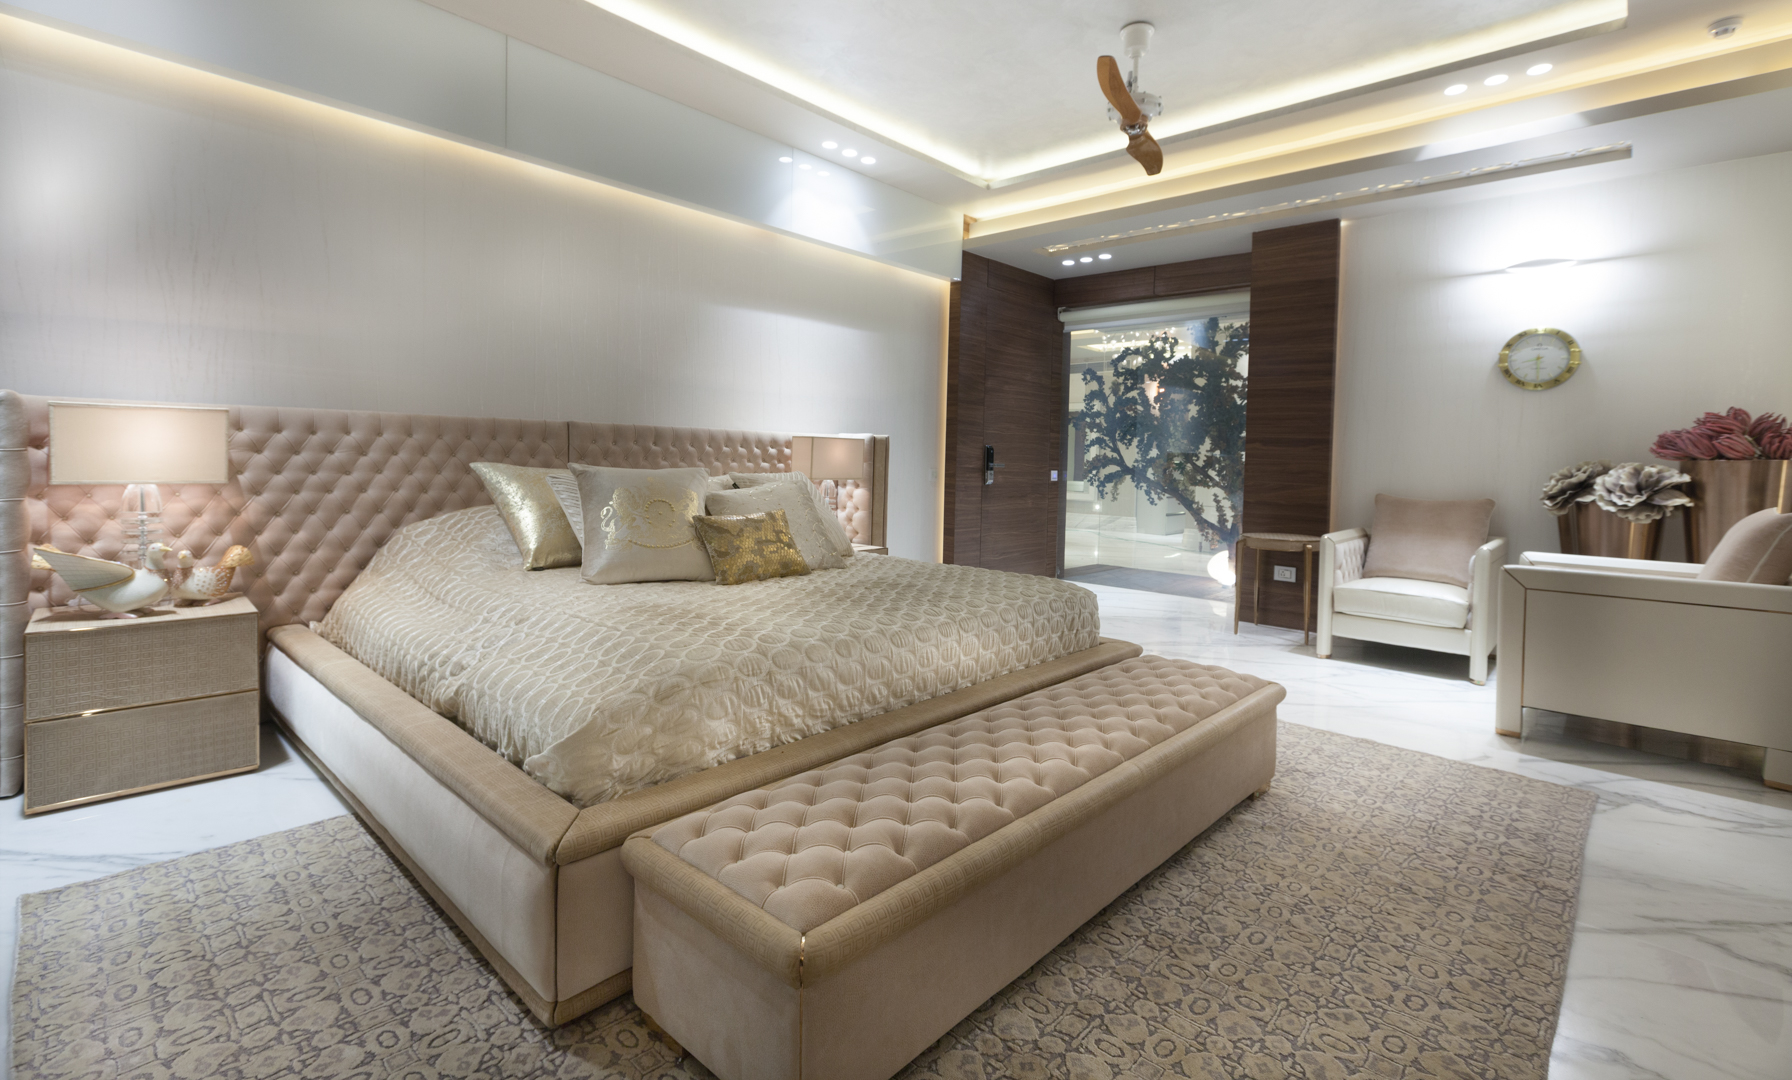 A Beautiful Bed Room Design by Essentia Environments | JACPL